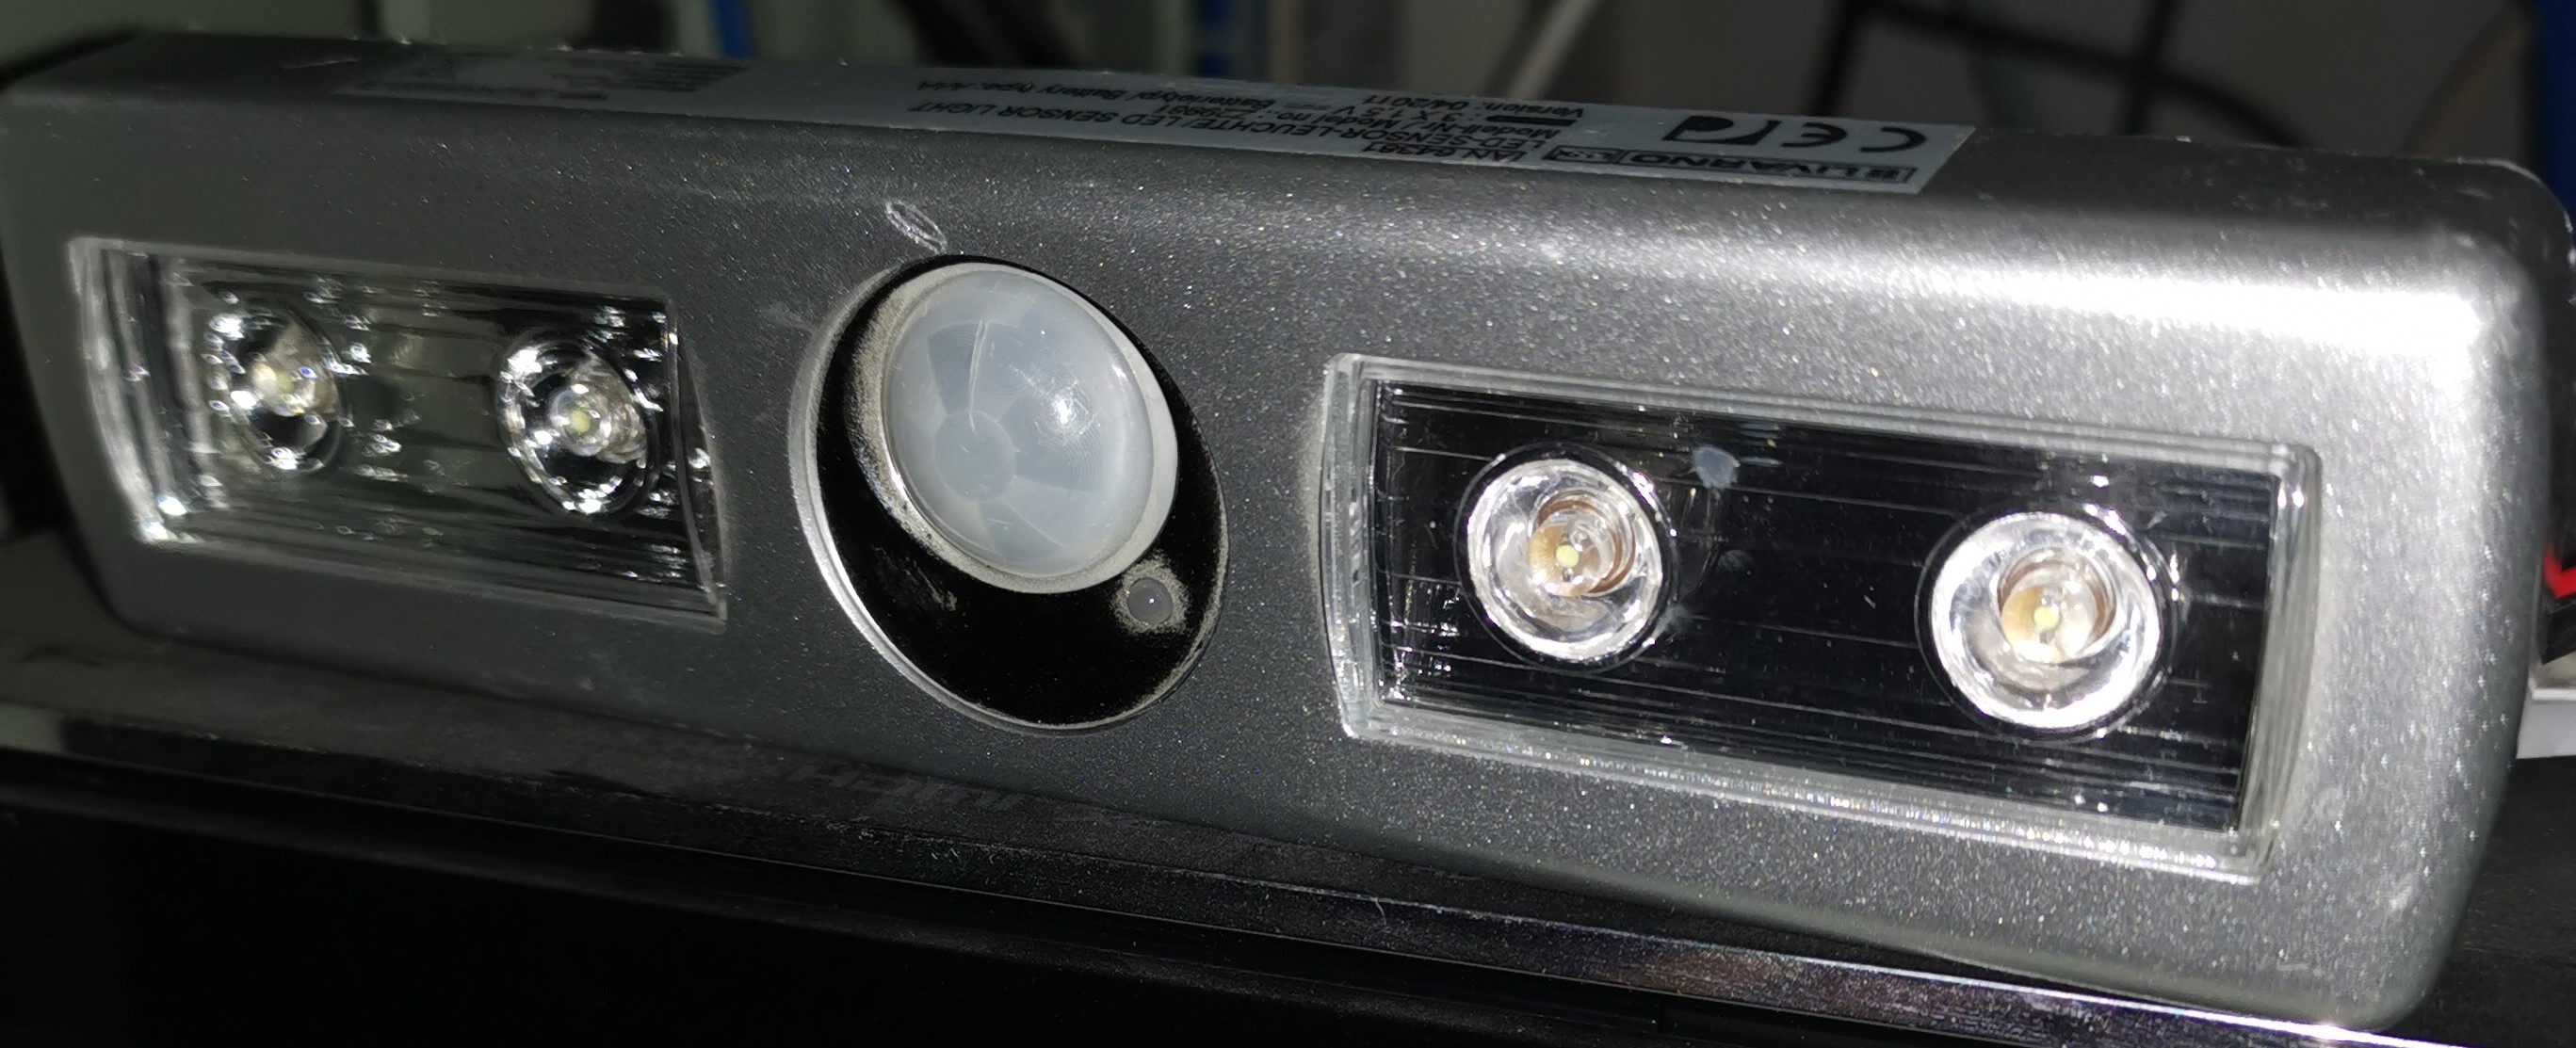 Lidl led light bar mounting bracket replacement